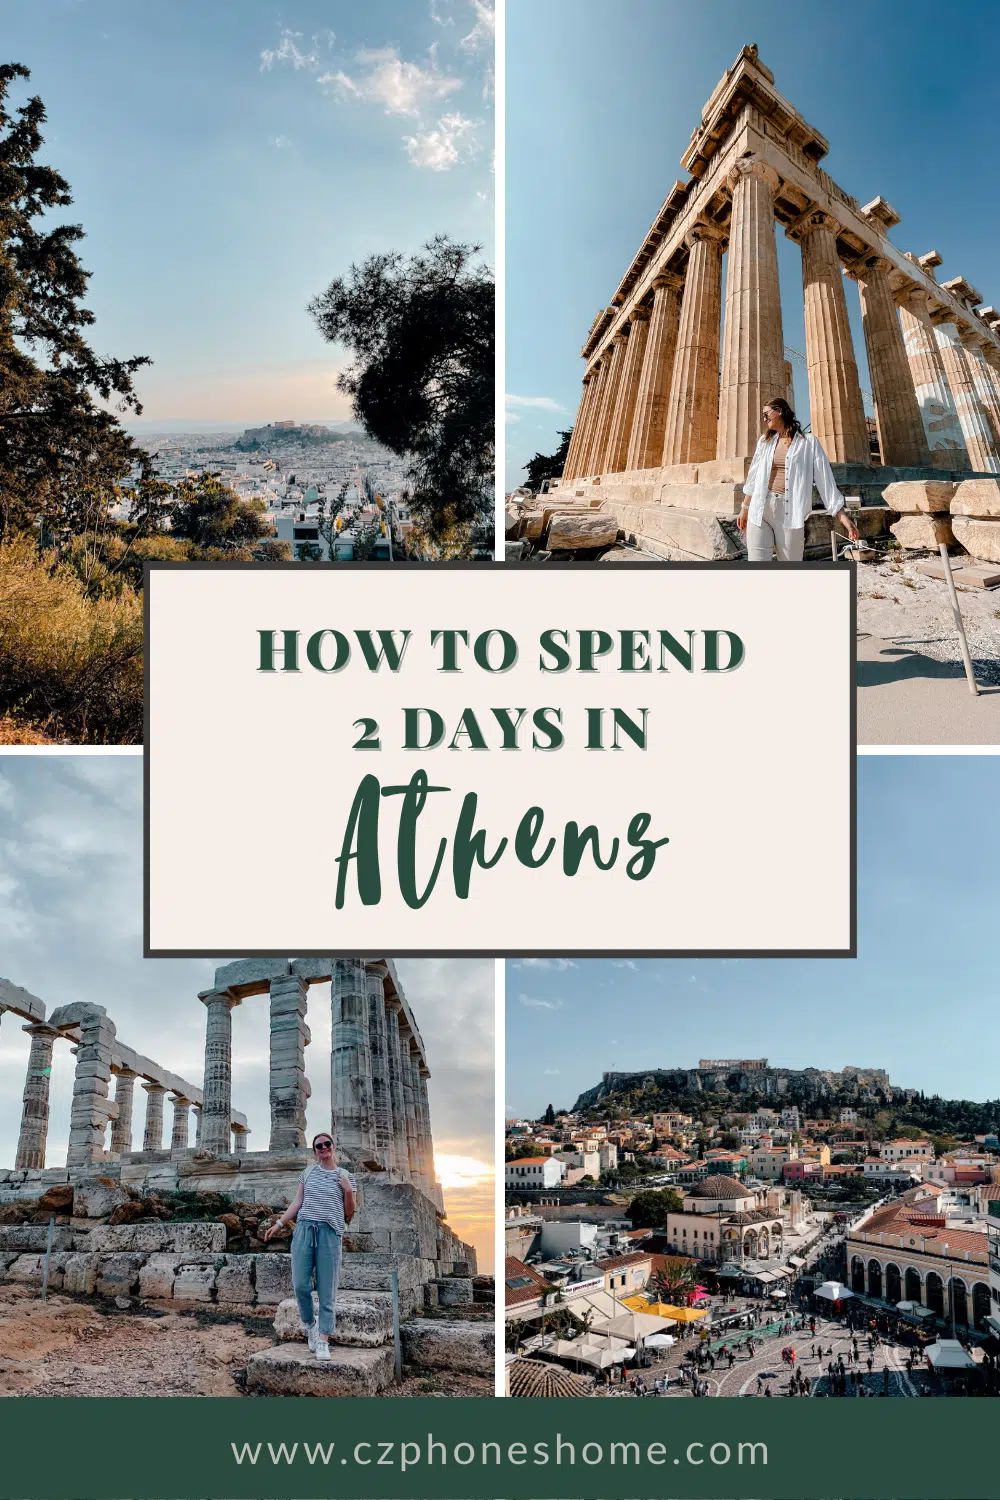 How to spend 2 PERFECT days in Athens